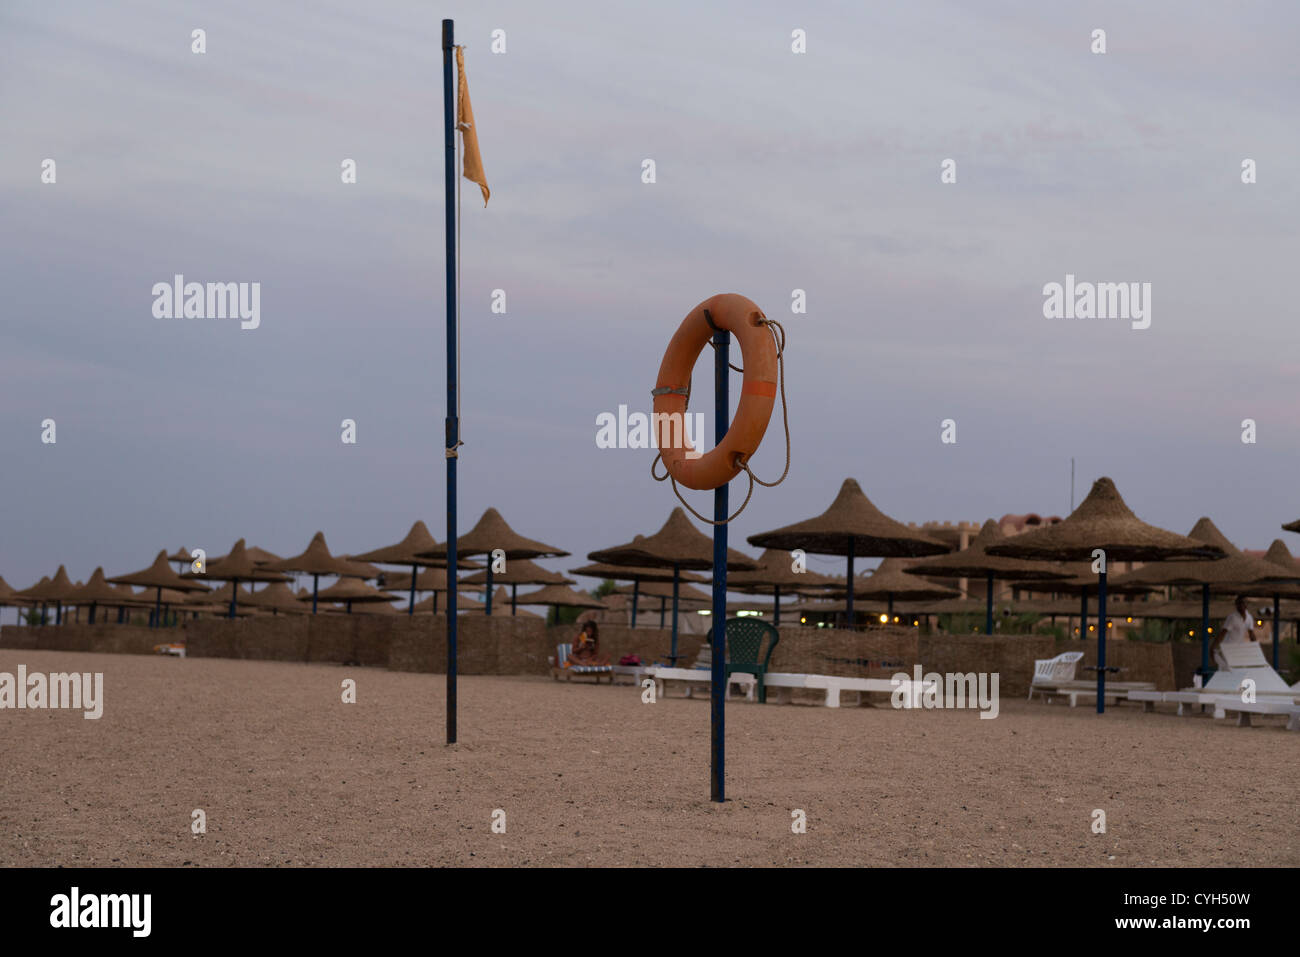 Evening at the beach. Flag pole and life buoy in foreground. Stock Photo